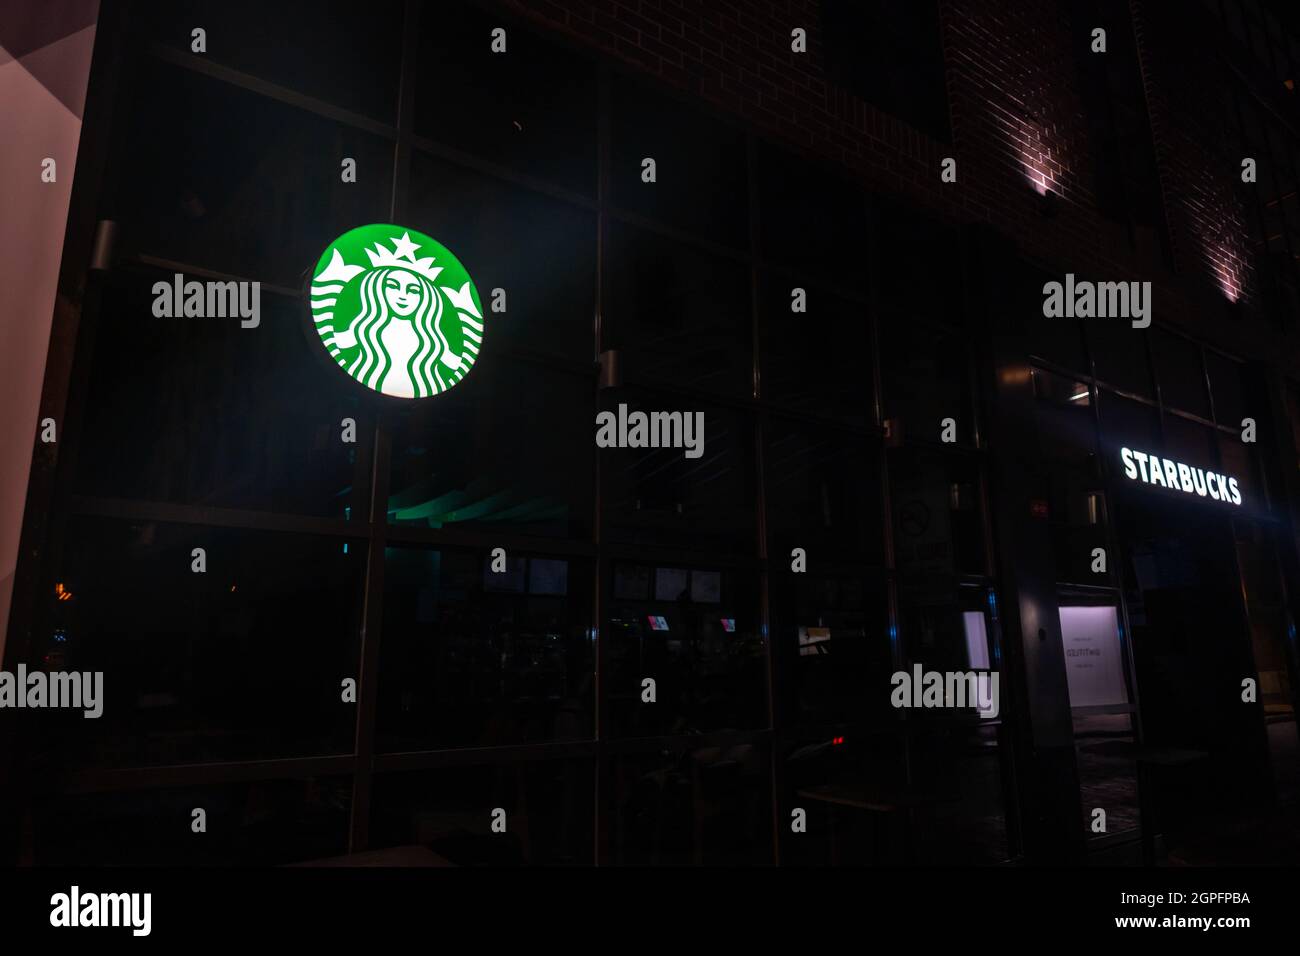 Beyoglu, Istanbul, Turkey - 07.07.2021: logo and text of Starbucks on window famous coffee shop in Karakoy region after closing by the personnel for d Stock Photo